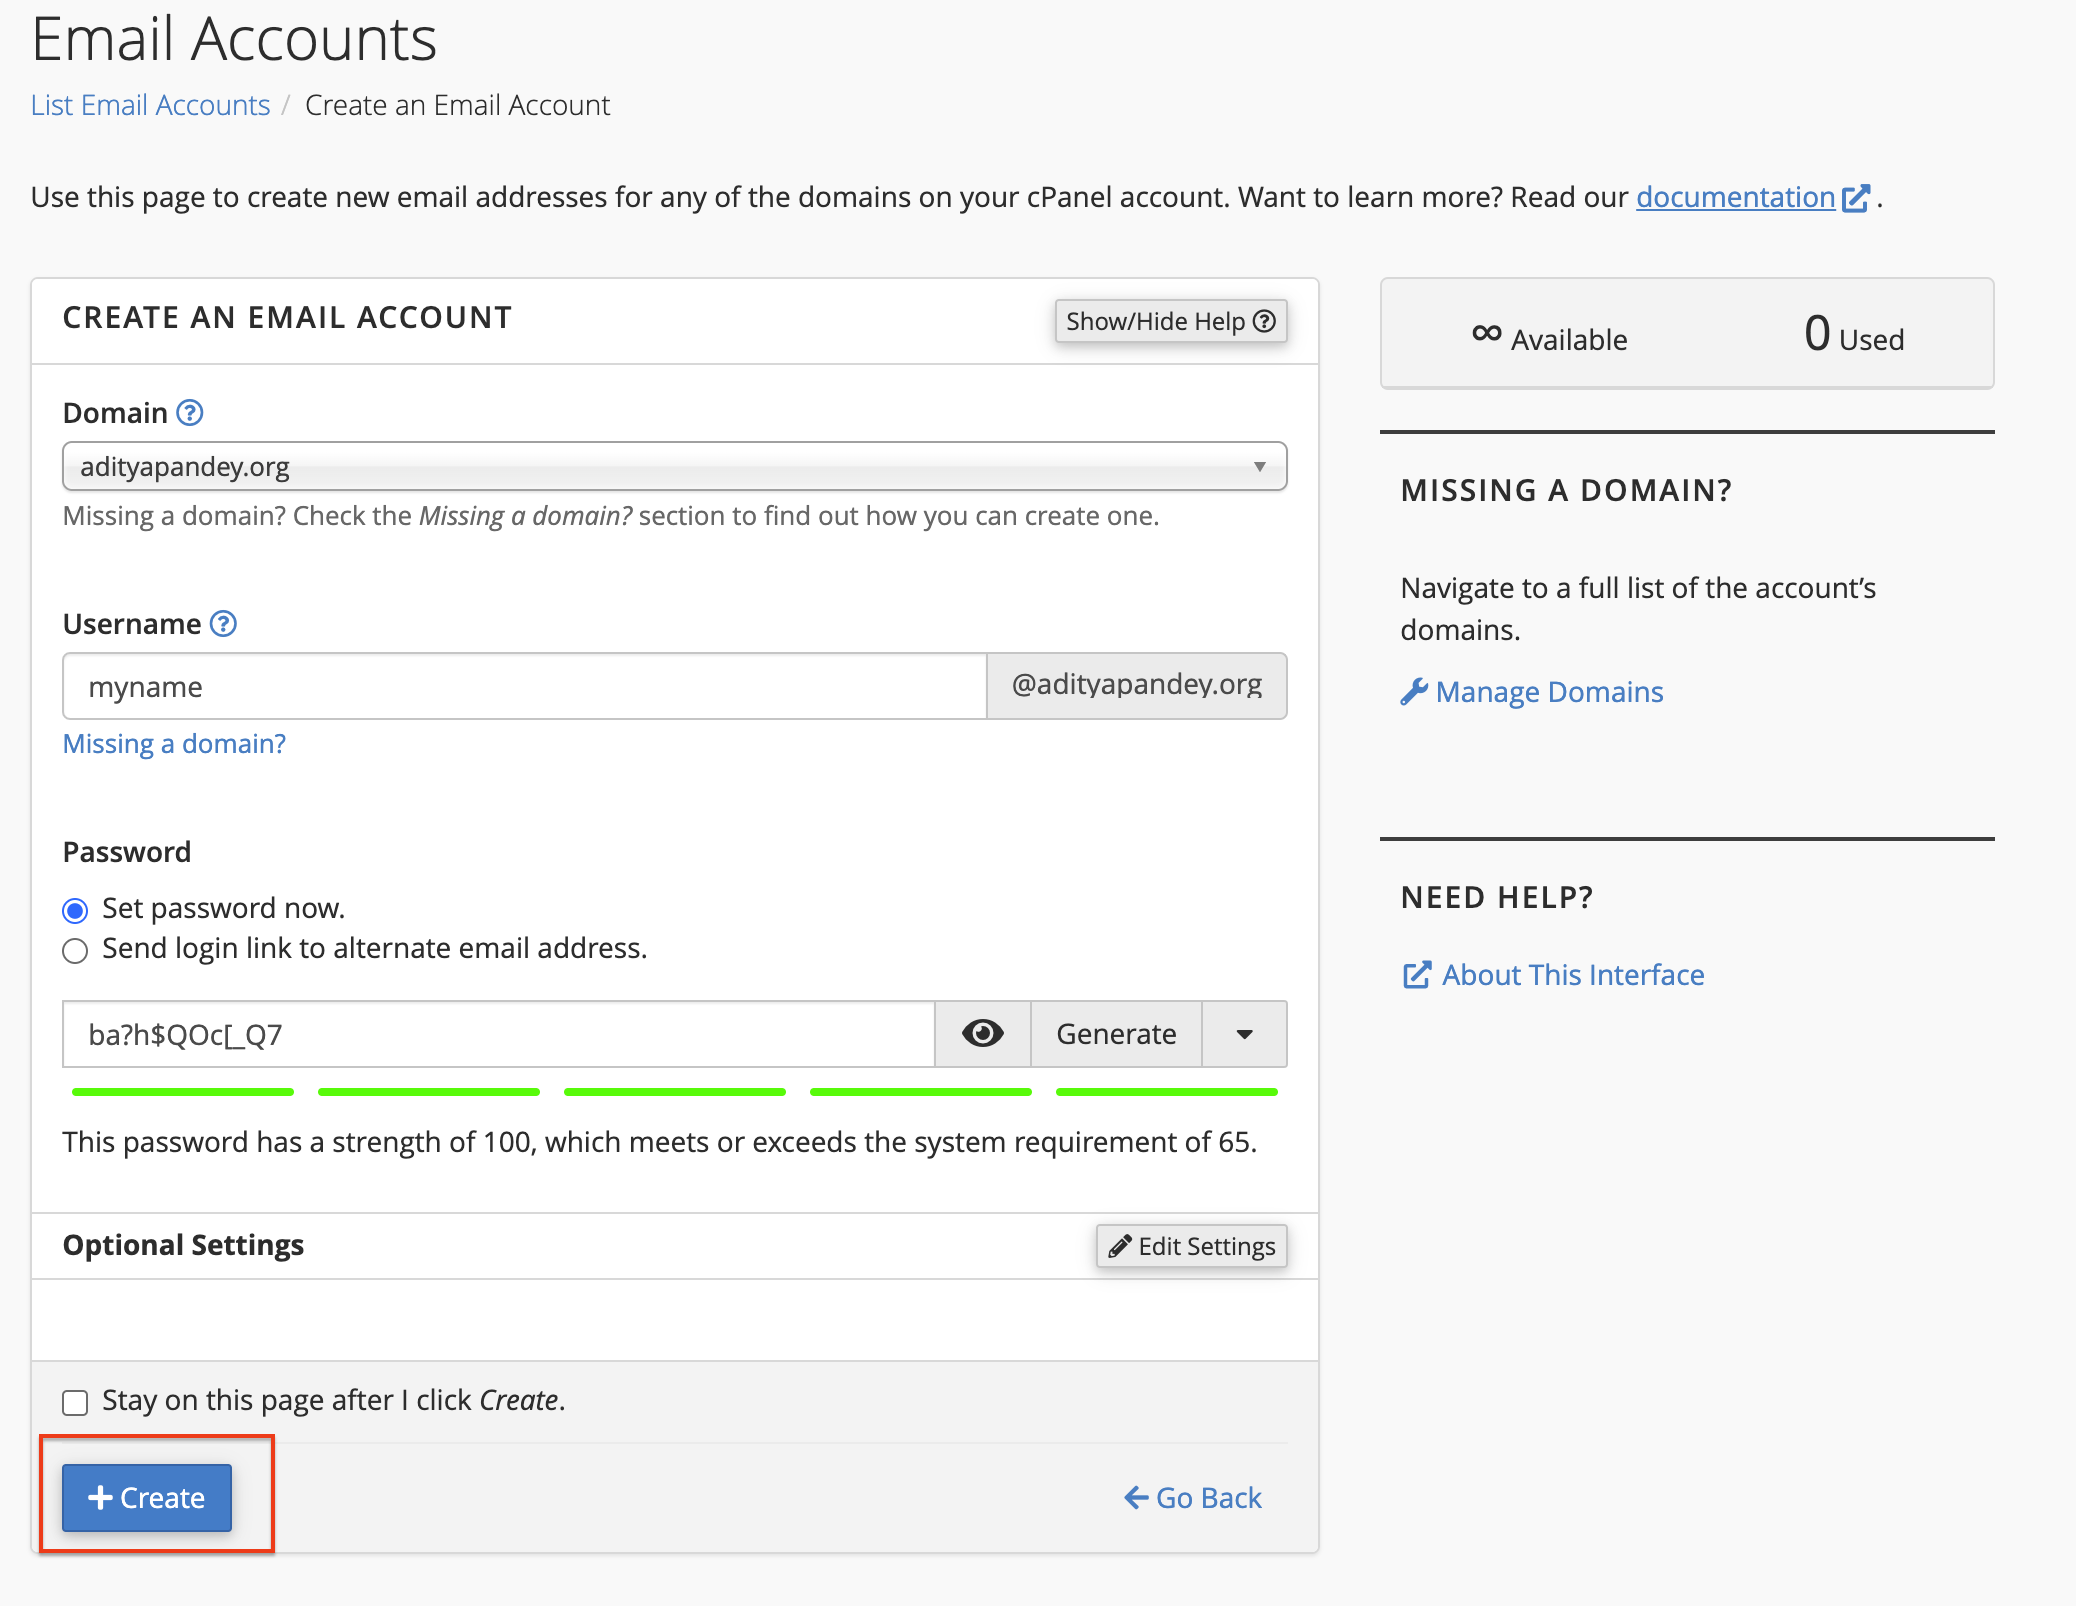 How to create an Email Account in cPanel Hosting 2